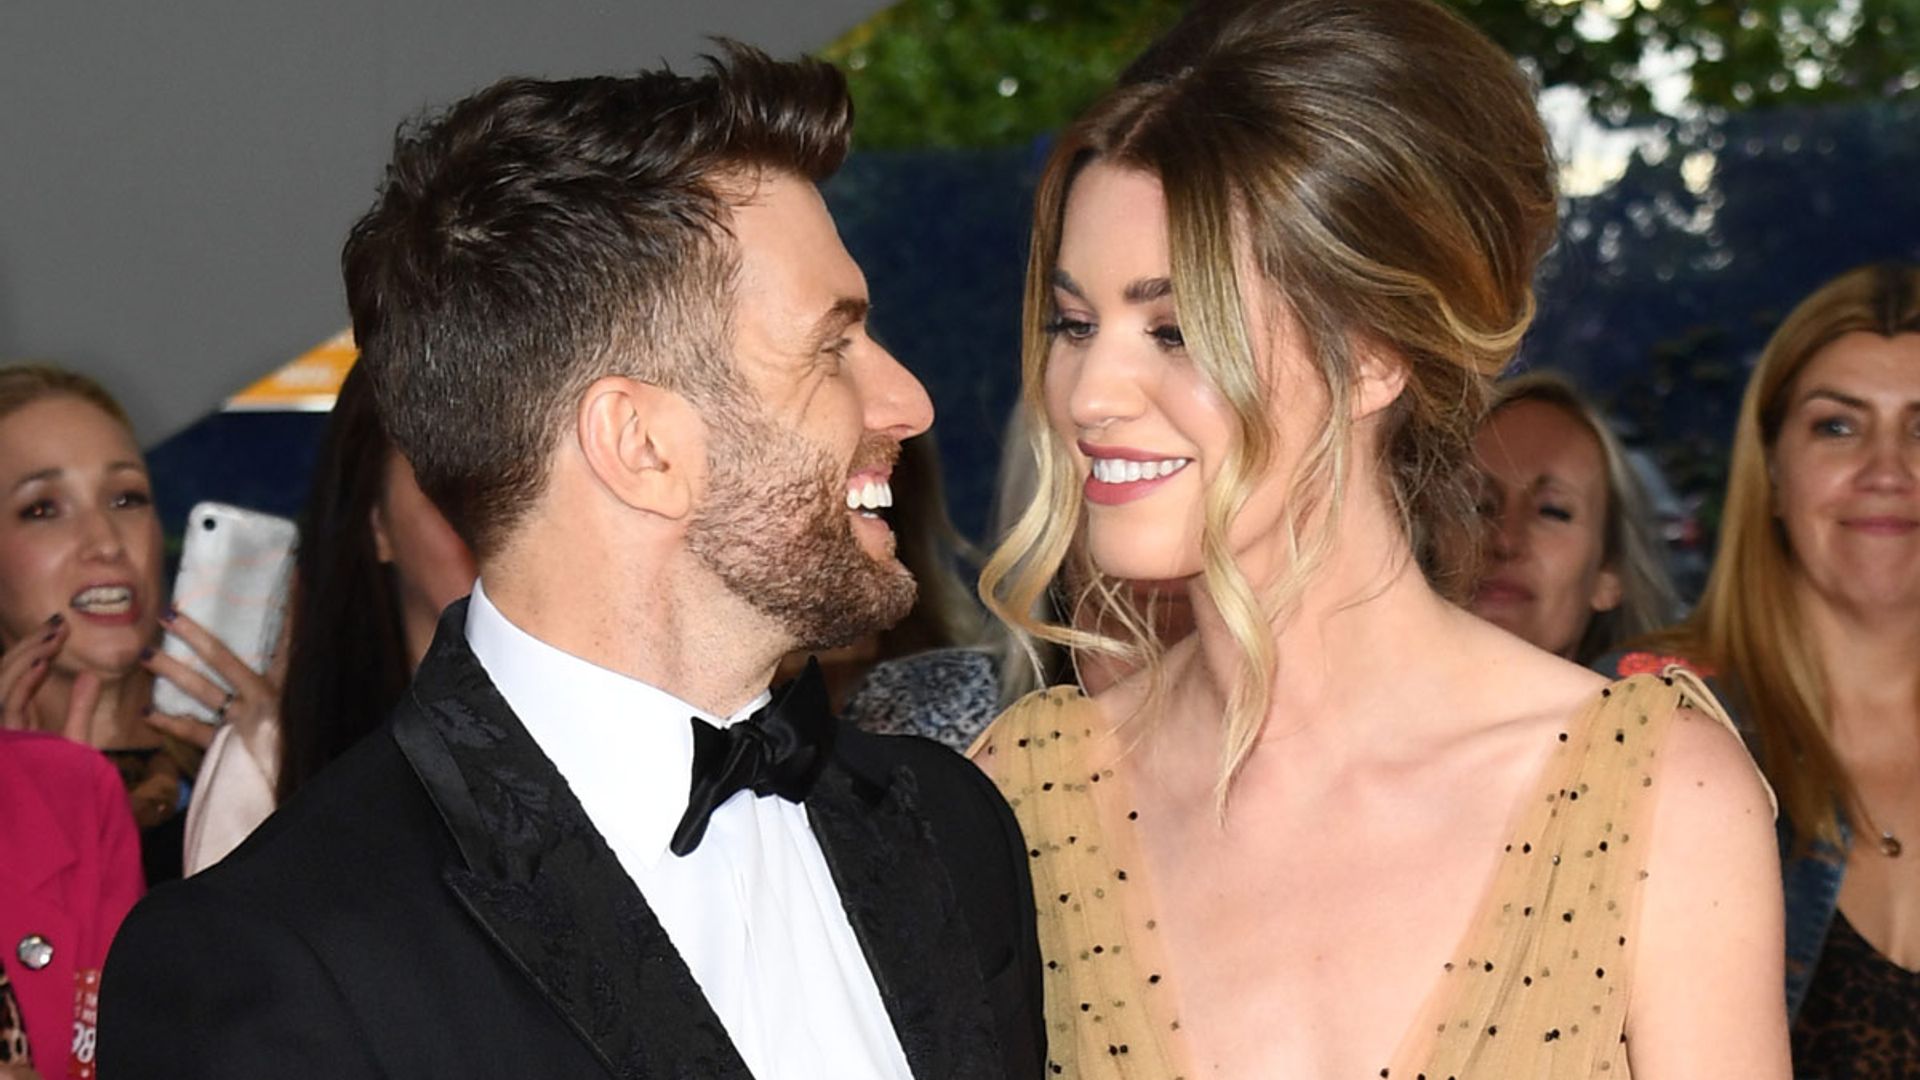 Joel Dommett reveals wife Hannah's bare baby bump in heartfelt new photo you don’t want to miss